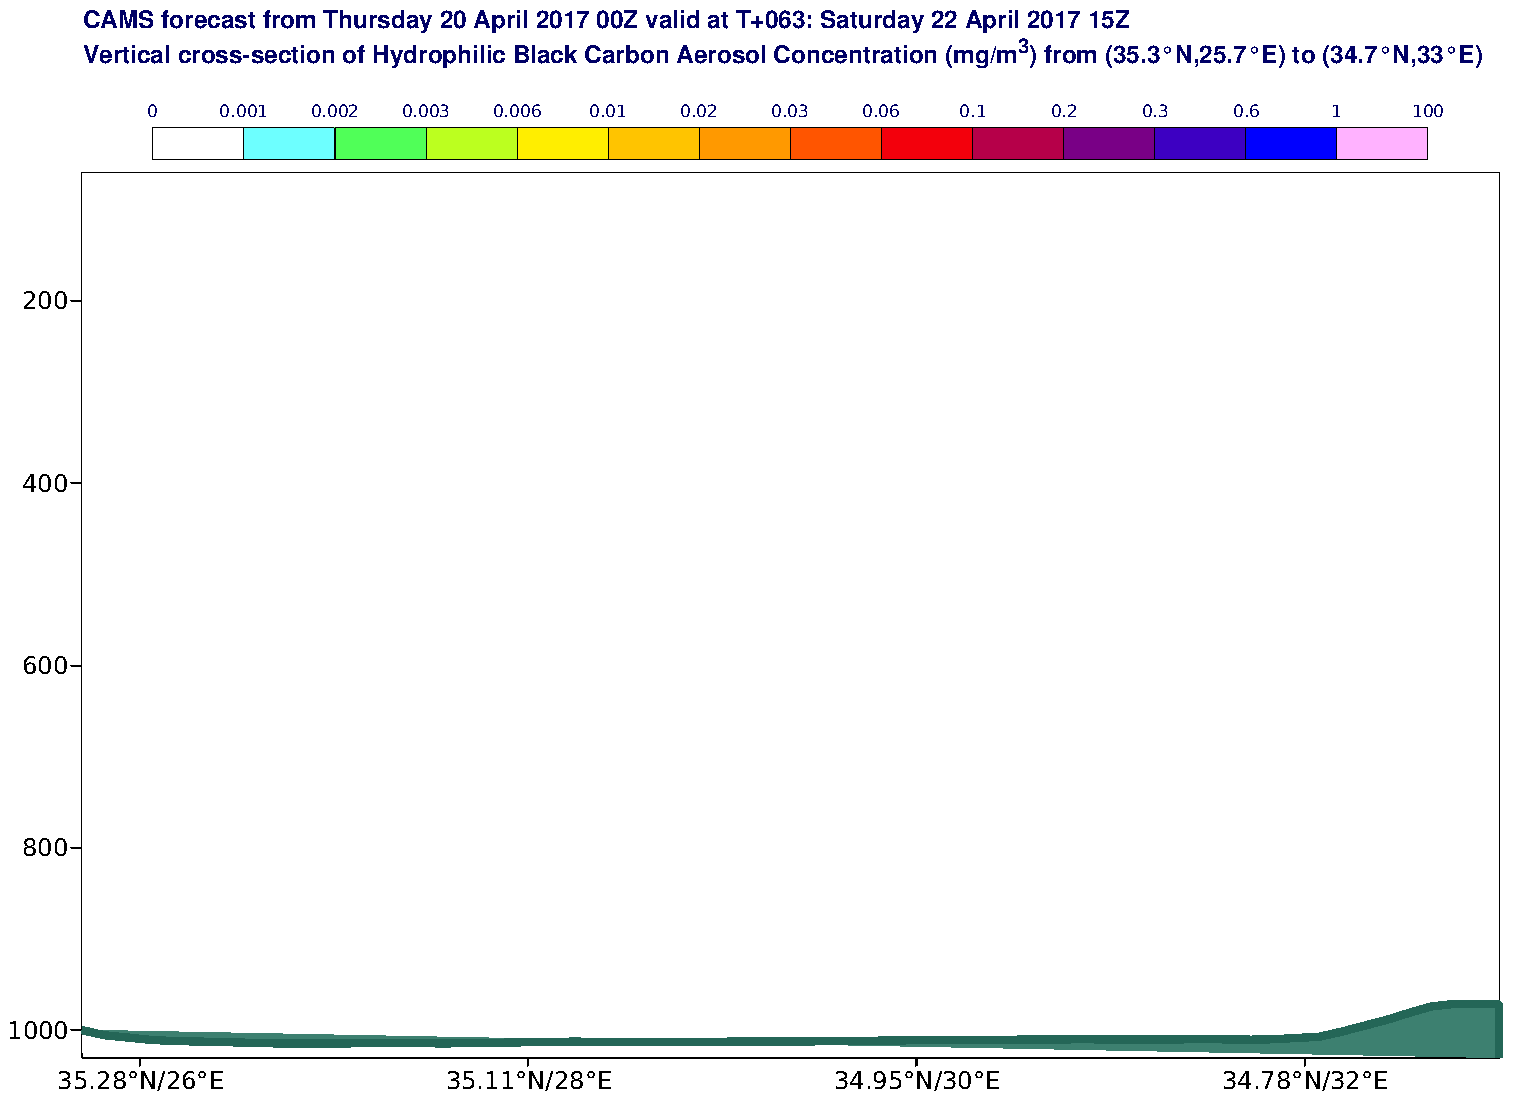 Vertical cross-section of Hydrophilic Black Carbon Aerosol Concentration (mg/m3) valid at T63 - 2017-04-22 15:00